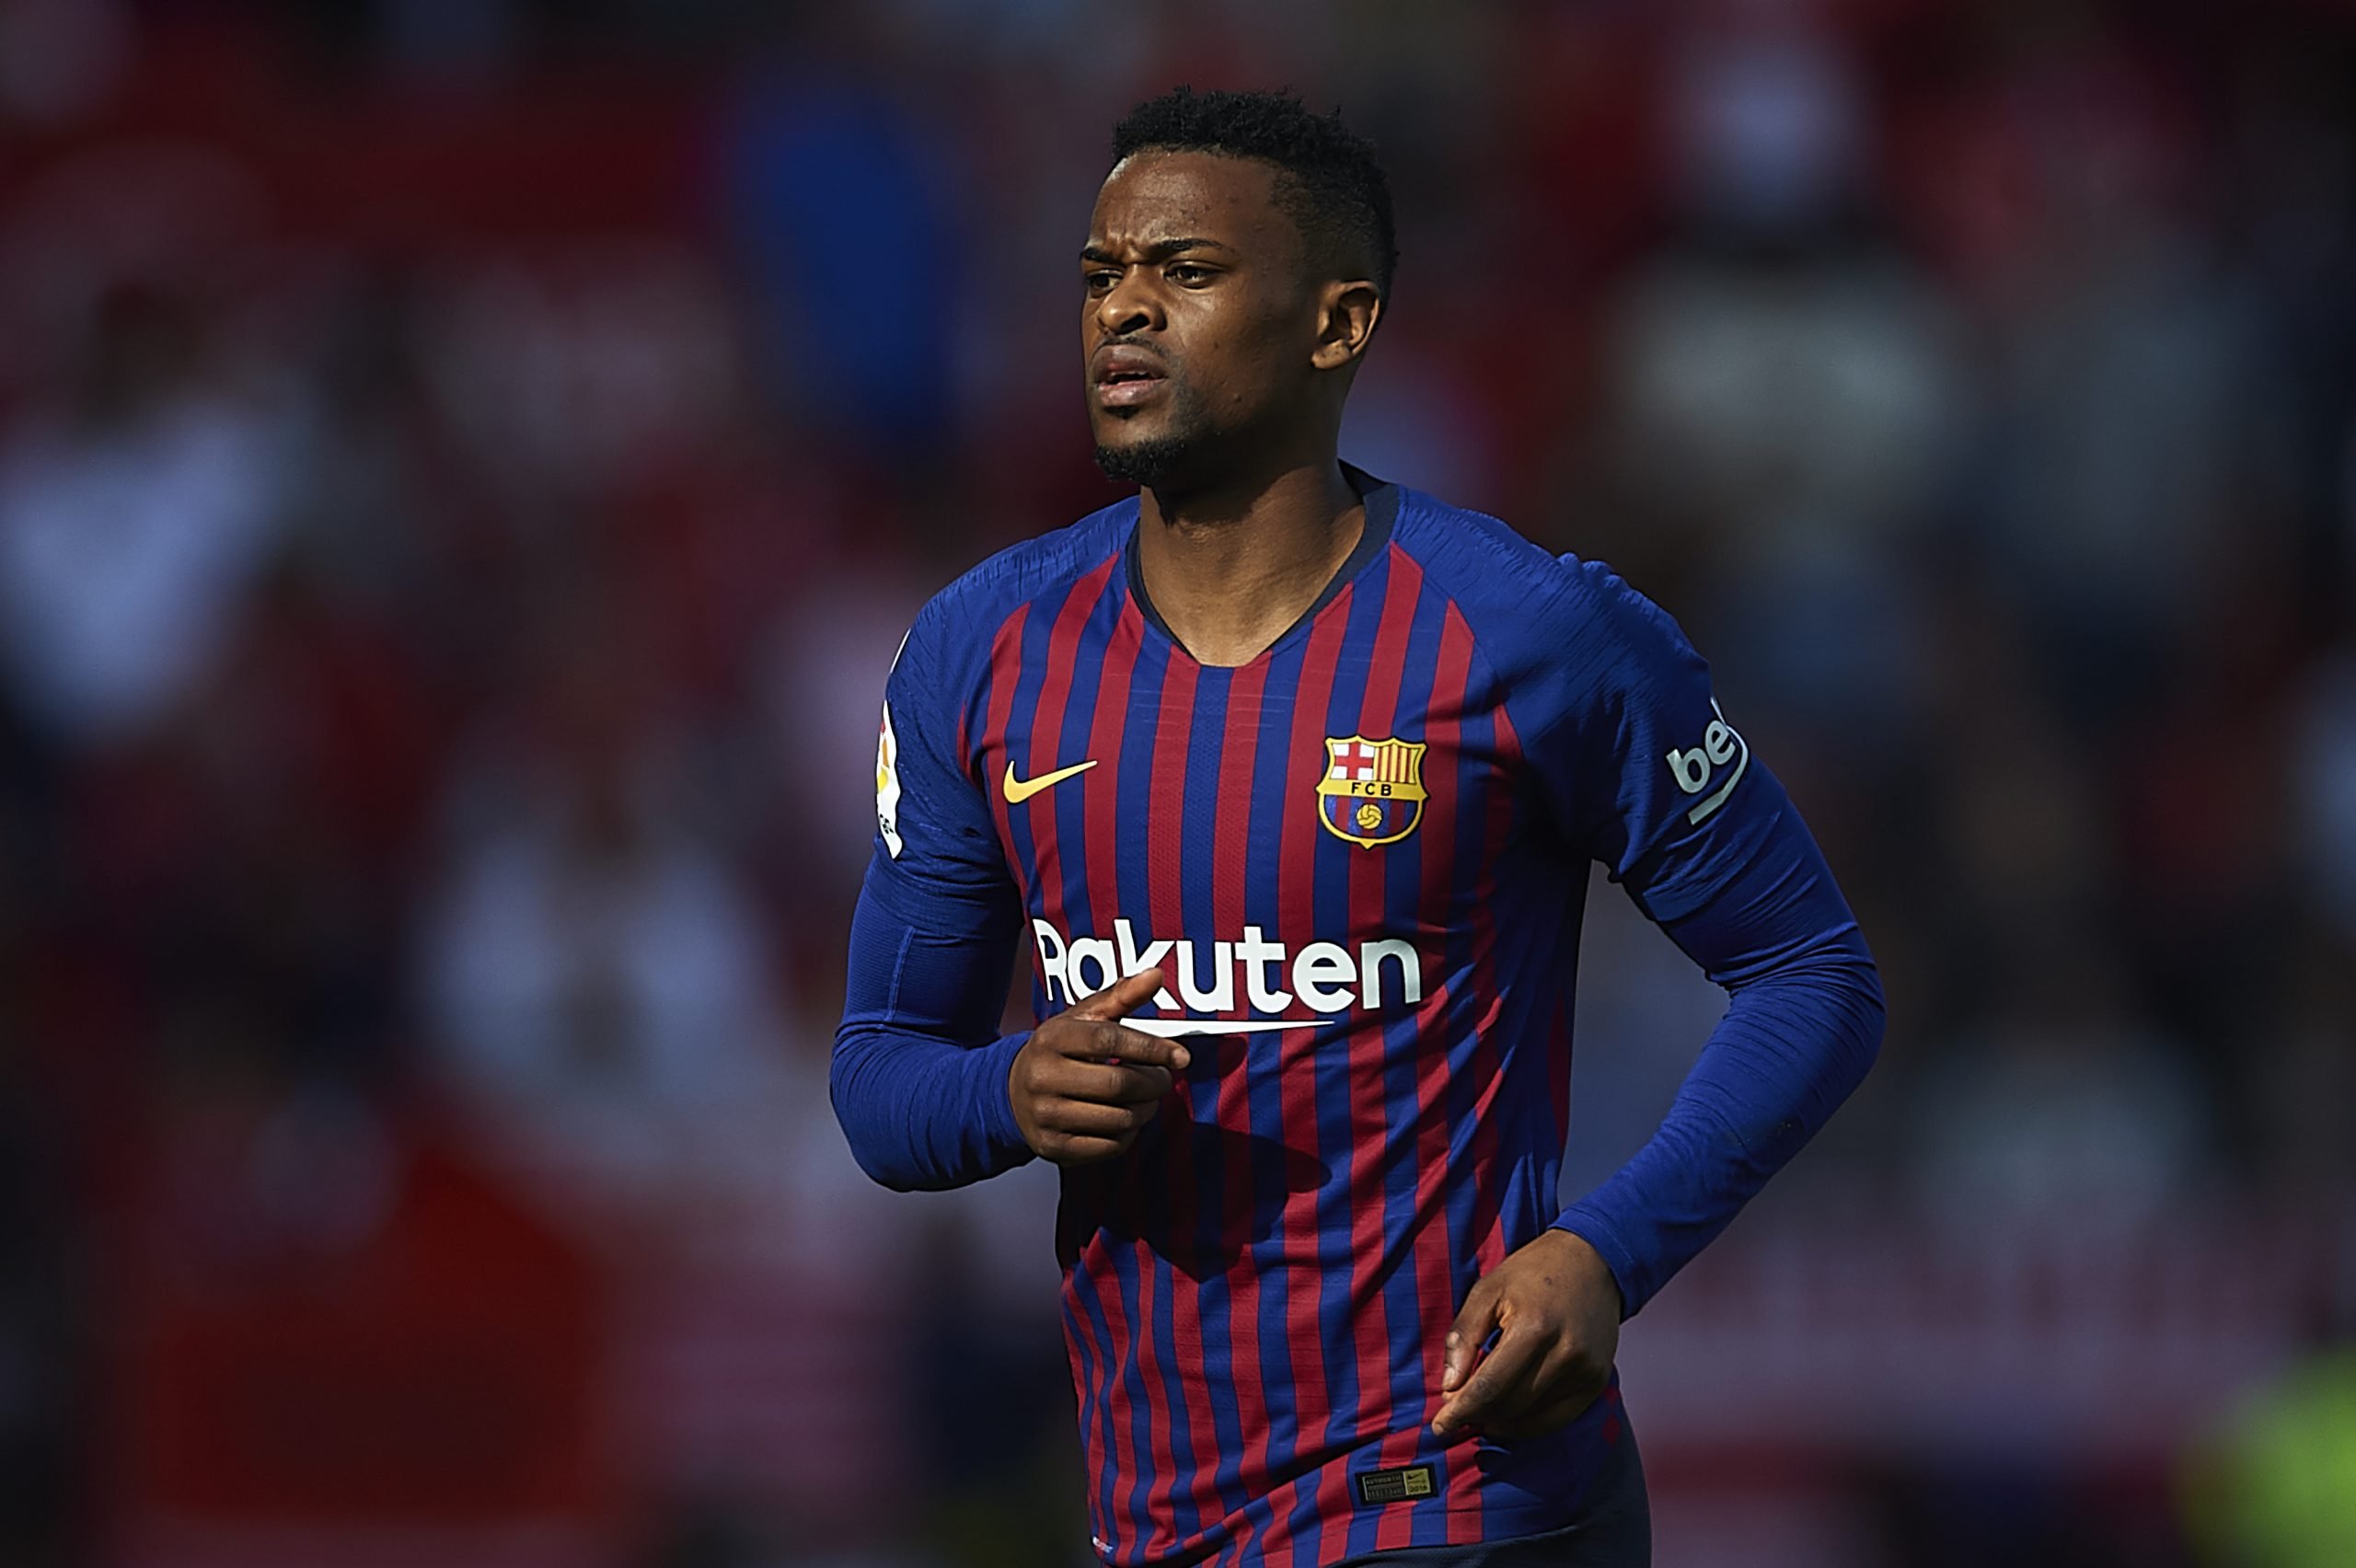 Manchester City are not interested in landing Nelson Semedo who is seen in the photo